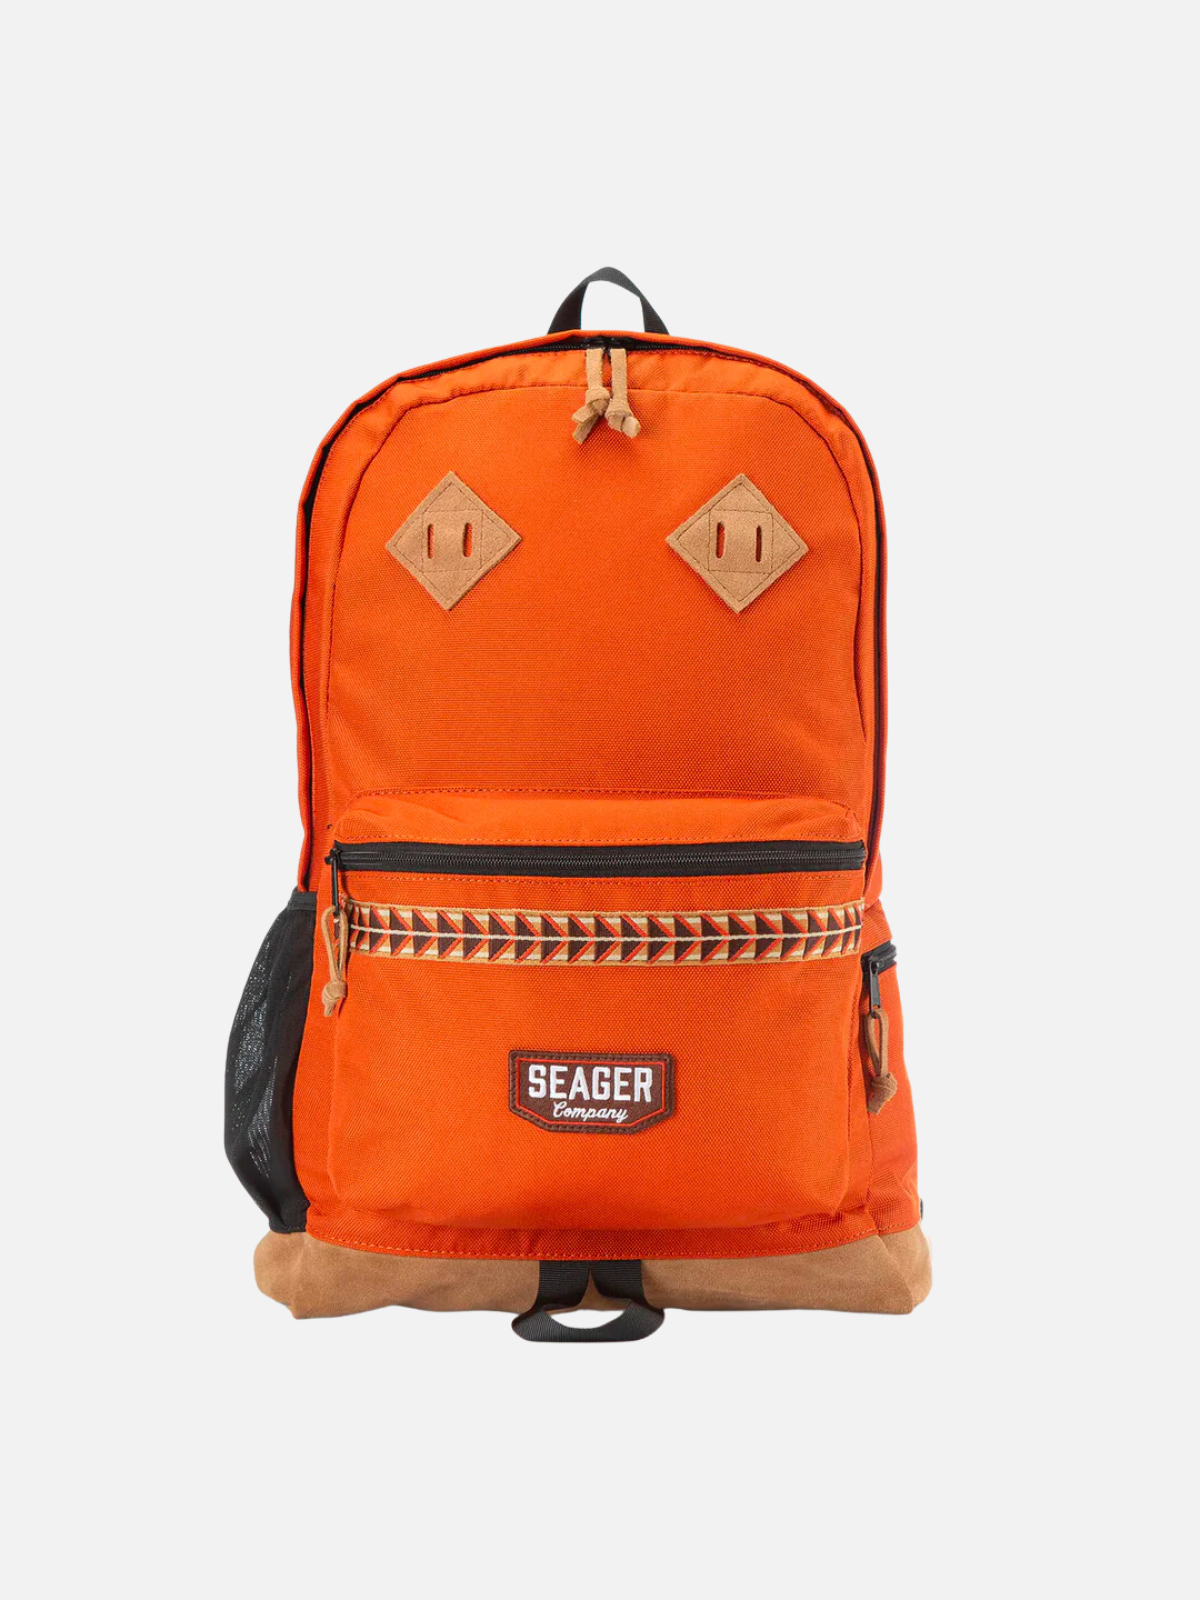 Seager Hickory Wind Backpack Rust Kempt Mens Clothing Store Athens Georgia UGA